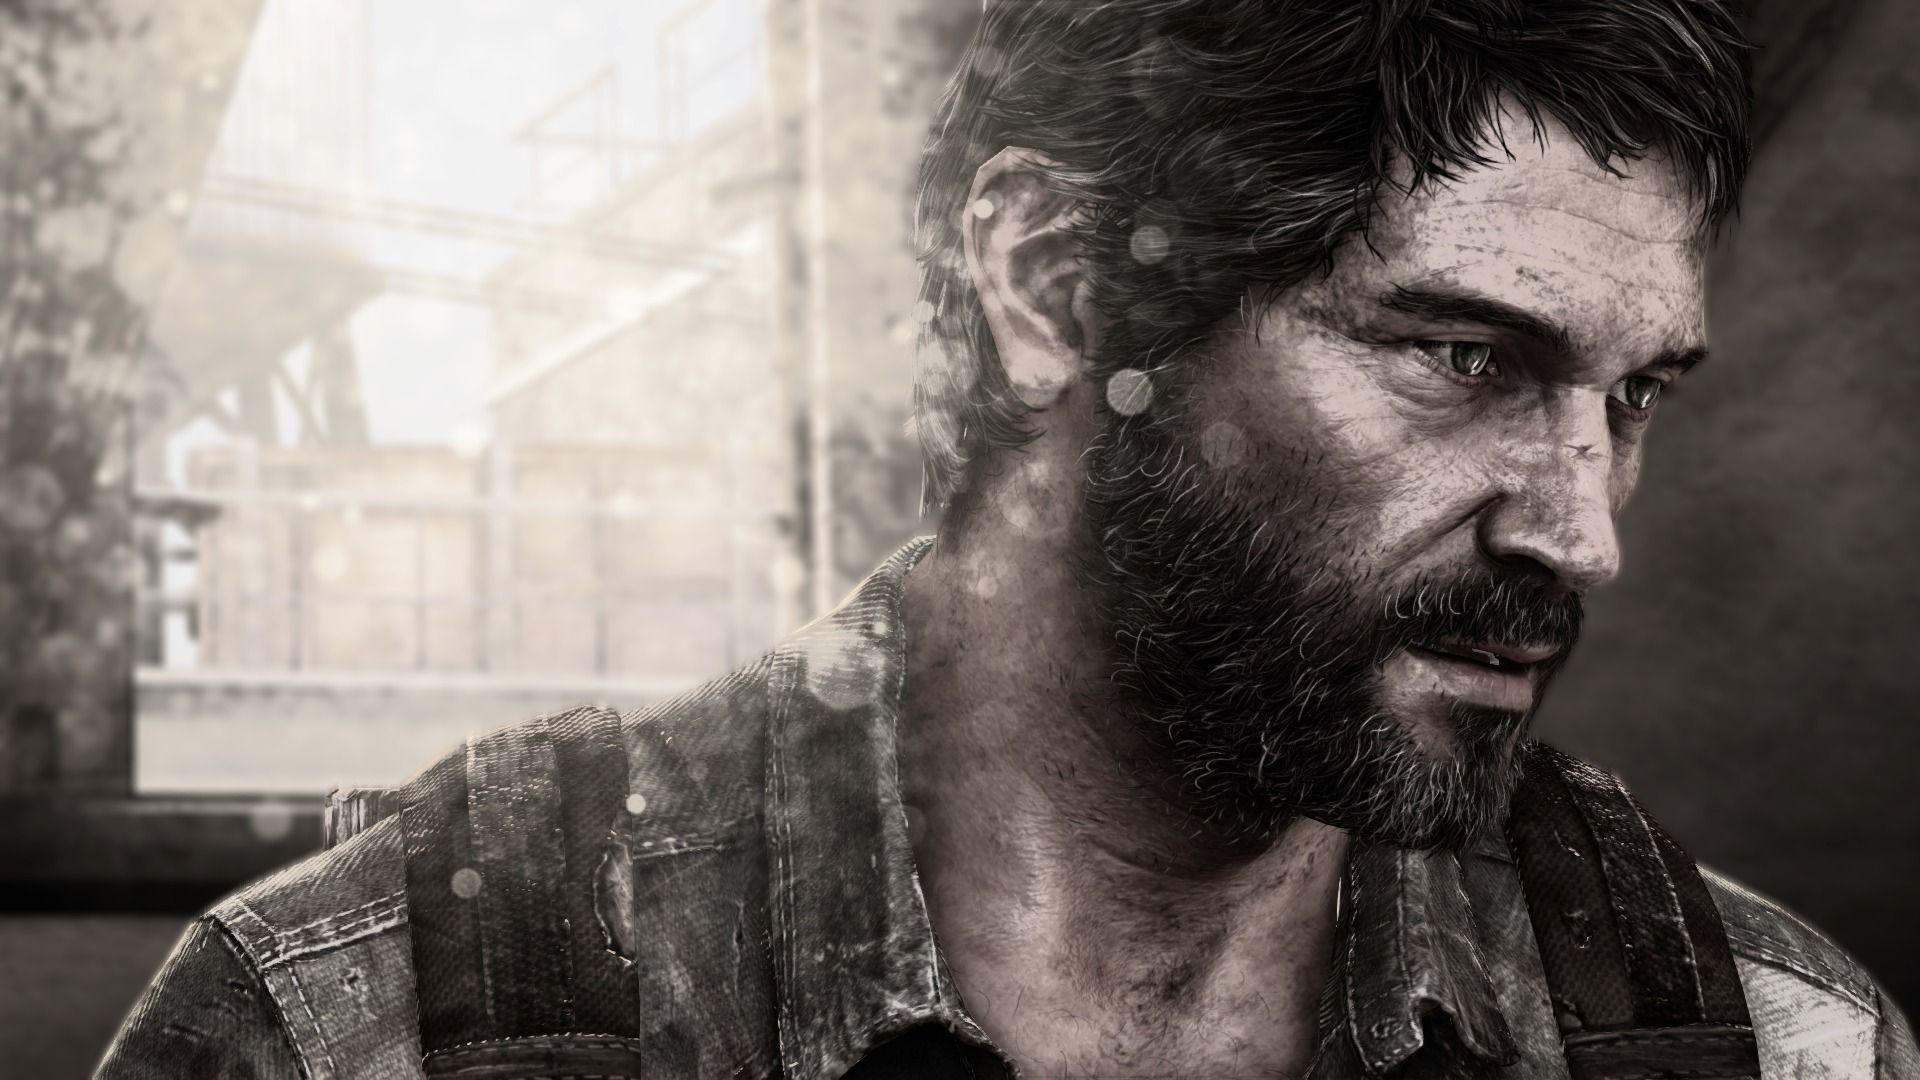 Joel The Last of Us Remastered PS4 Horror Game 2014 HD Wallpaper